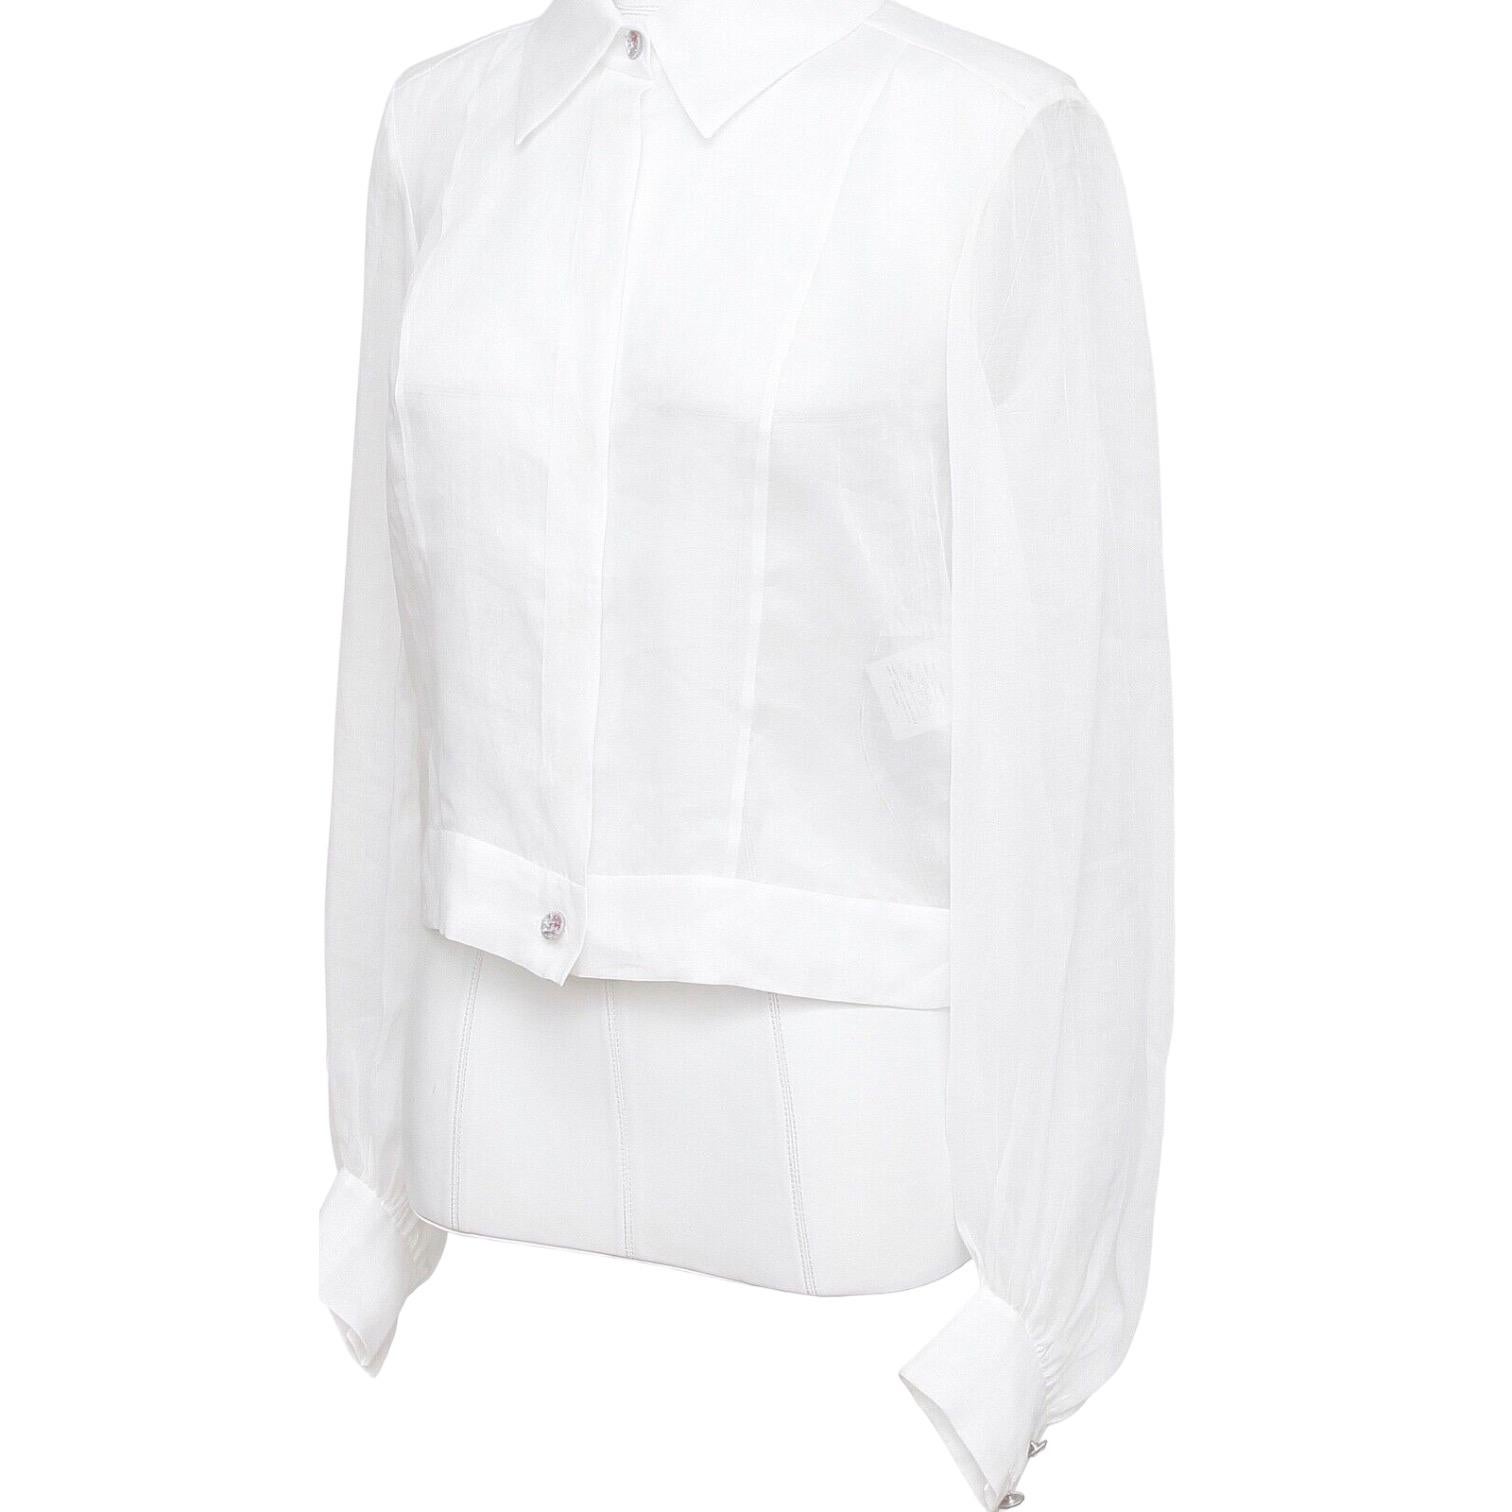 CHANEL White Blouse Top Long Sleeve Cotton 2017 17C $1800 NWT 2